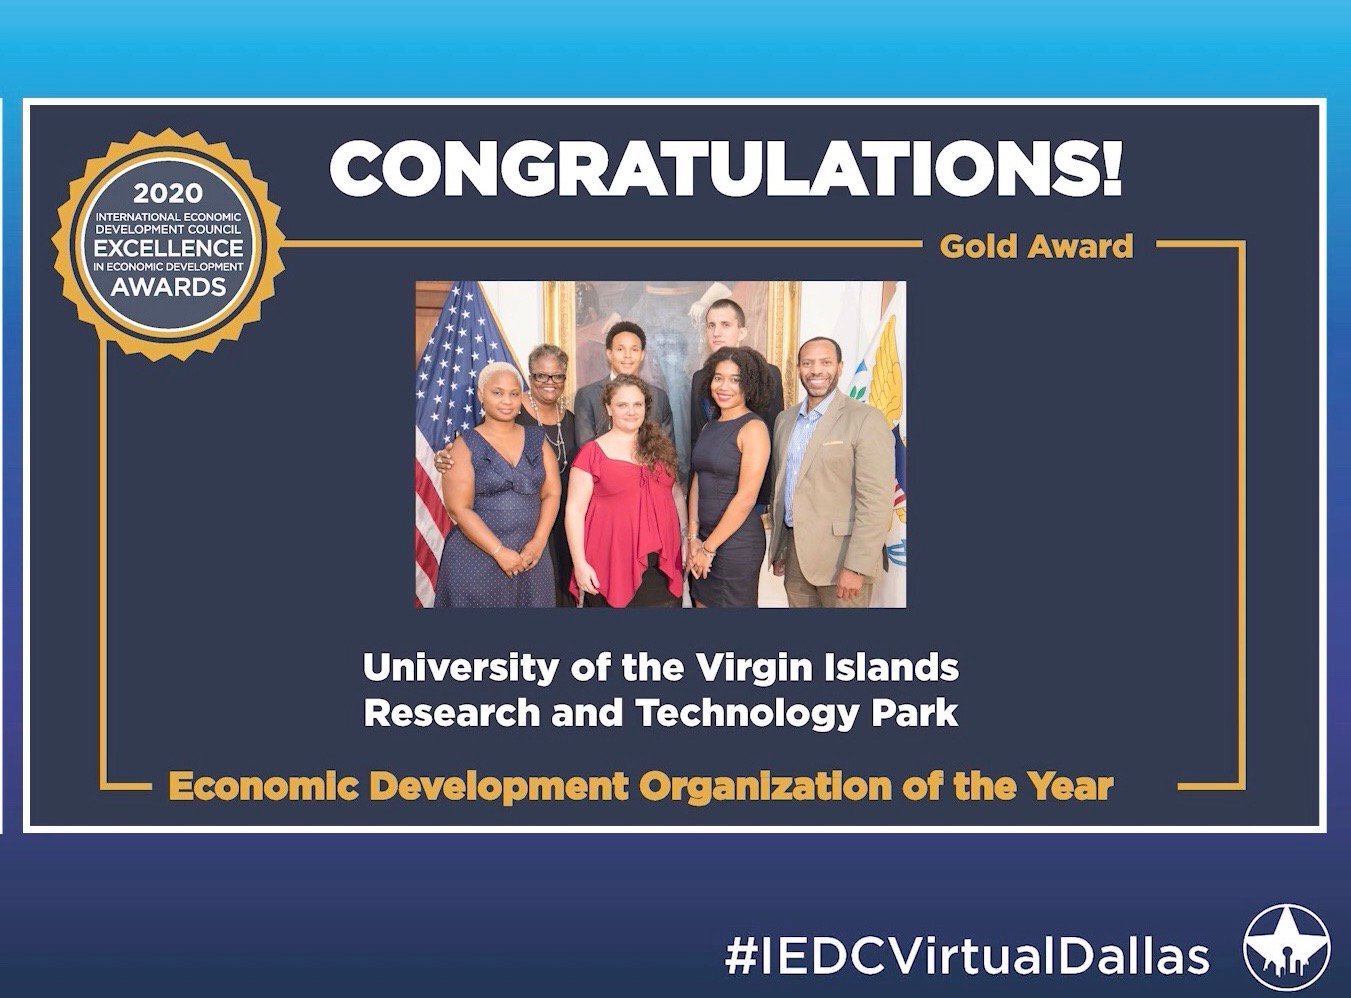 THE USVI RESEARCH AND TECHNOLOGY PARK RECEIVES EDO OF THE YEAR AWARD FROM THE INTERNATIONAL ECONOMIC DEVELOPMENT COUNCIL